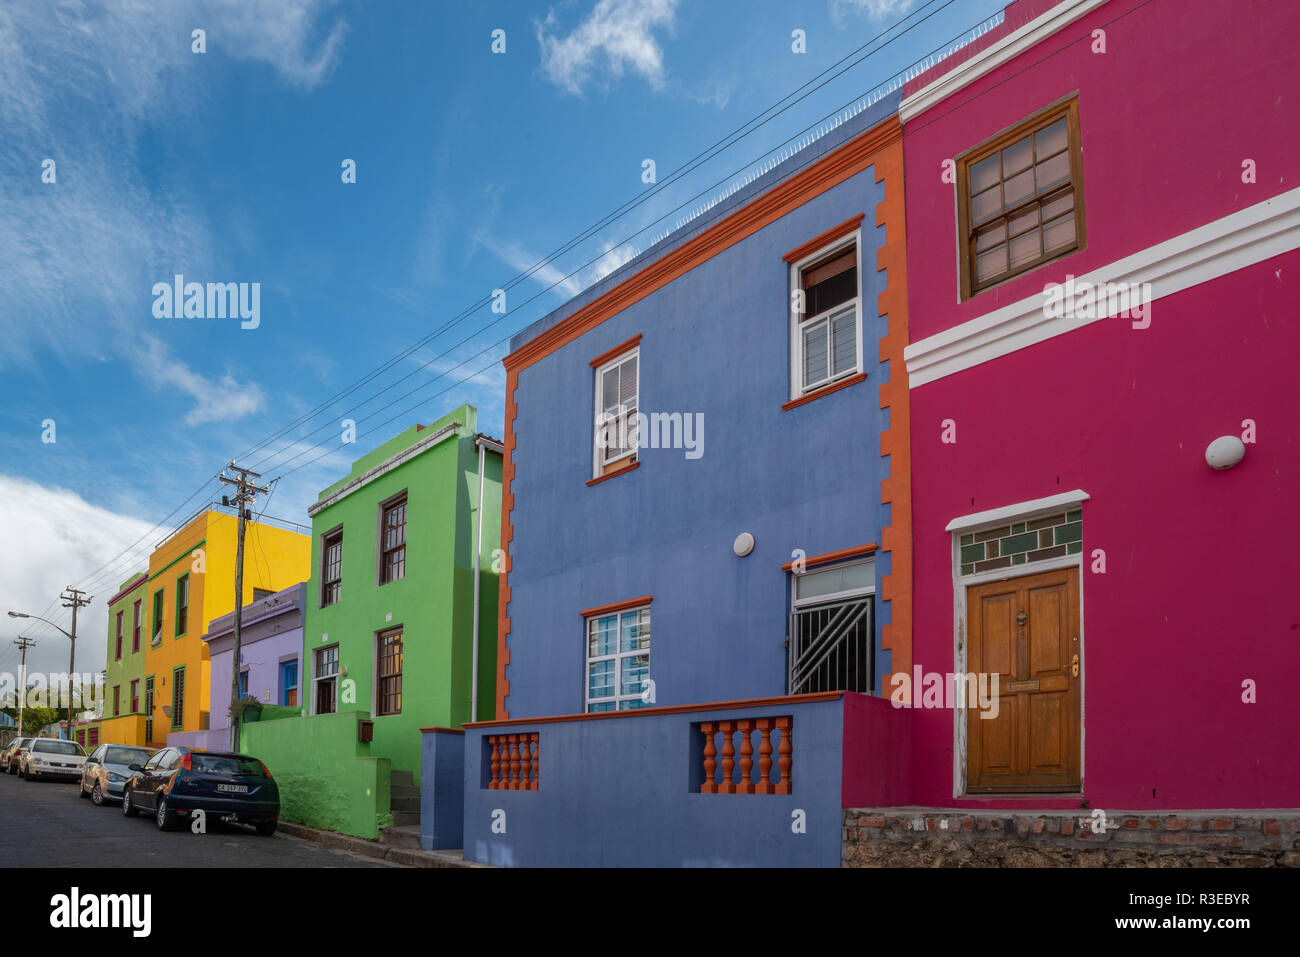 Colourful houses make outside museums of these beautiful streets in Cape Town's Bo-Kaap district, South Africa Stock Photo